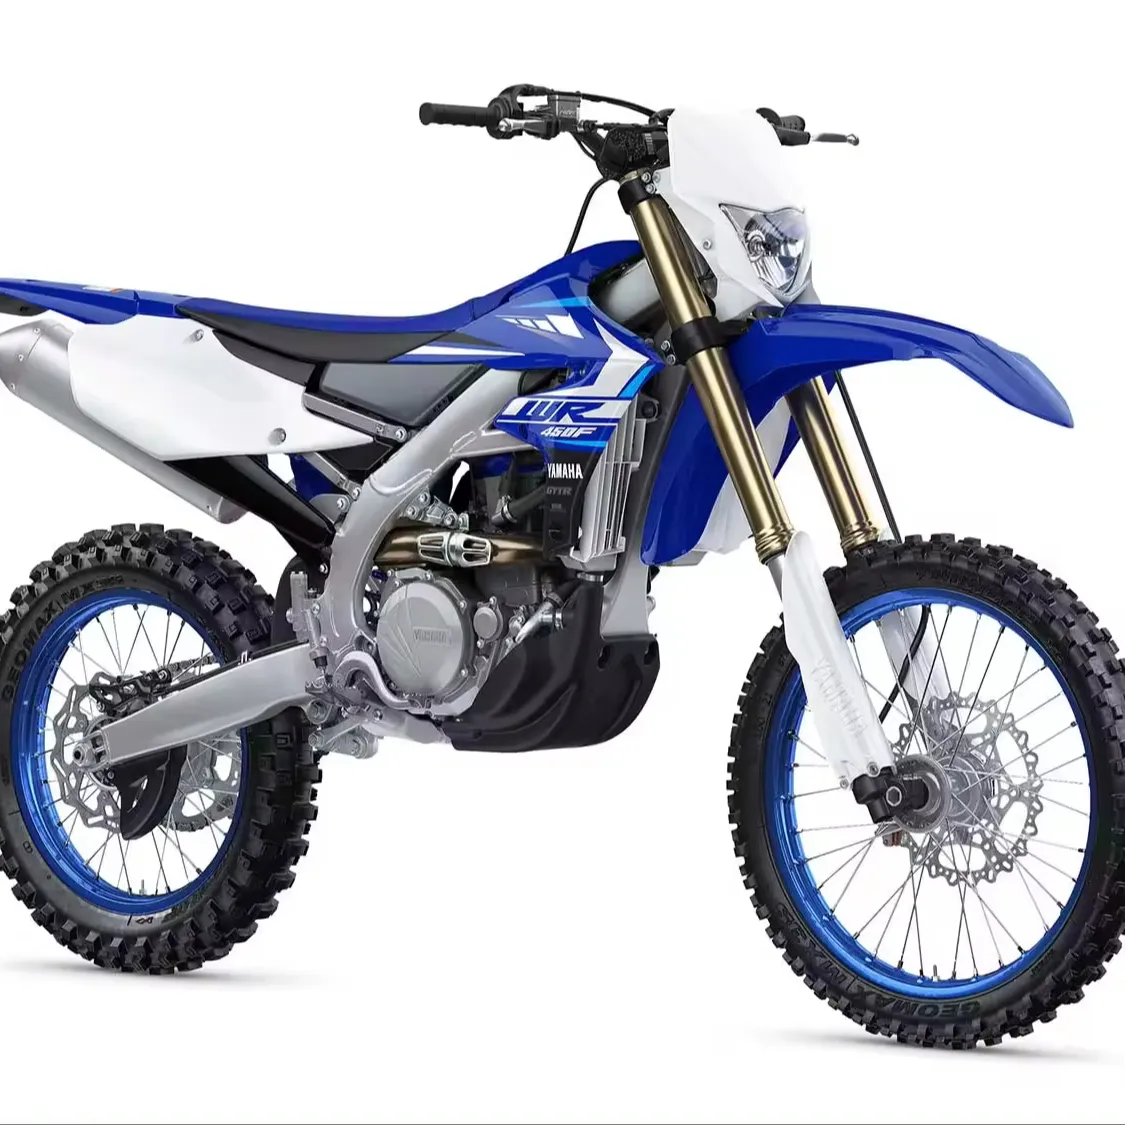 Top Verified Authorized Seller for New 2022 WR450F 450cc enduro Dirt bike motorcycle